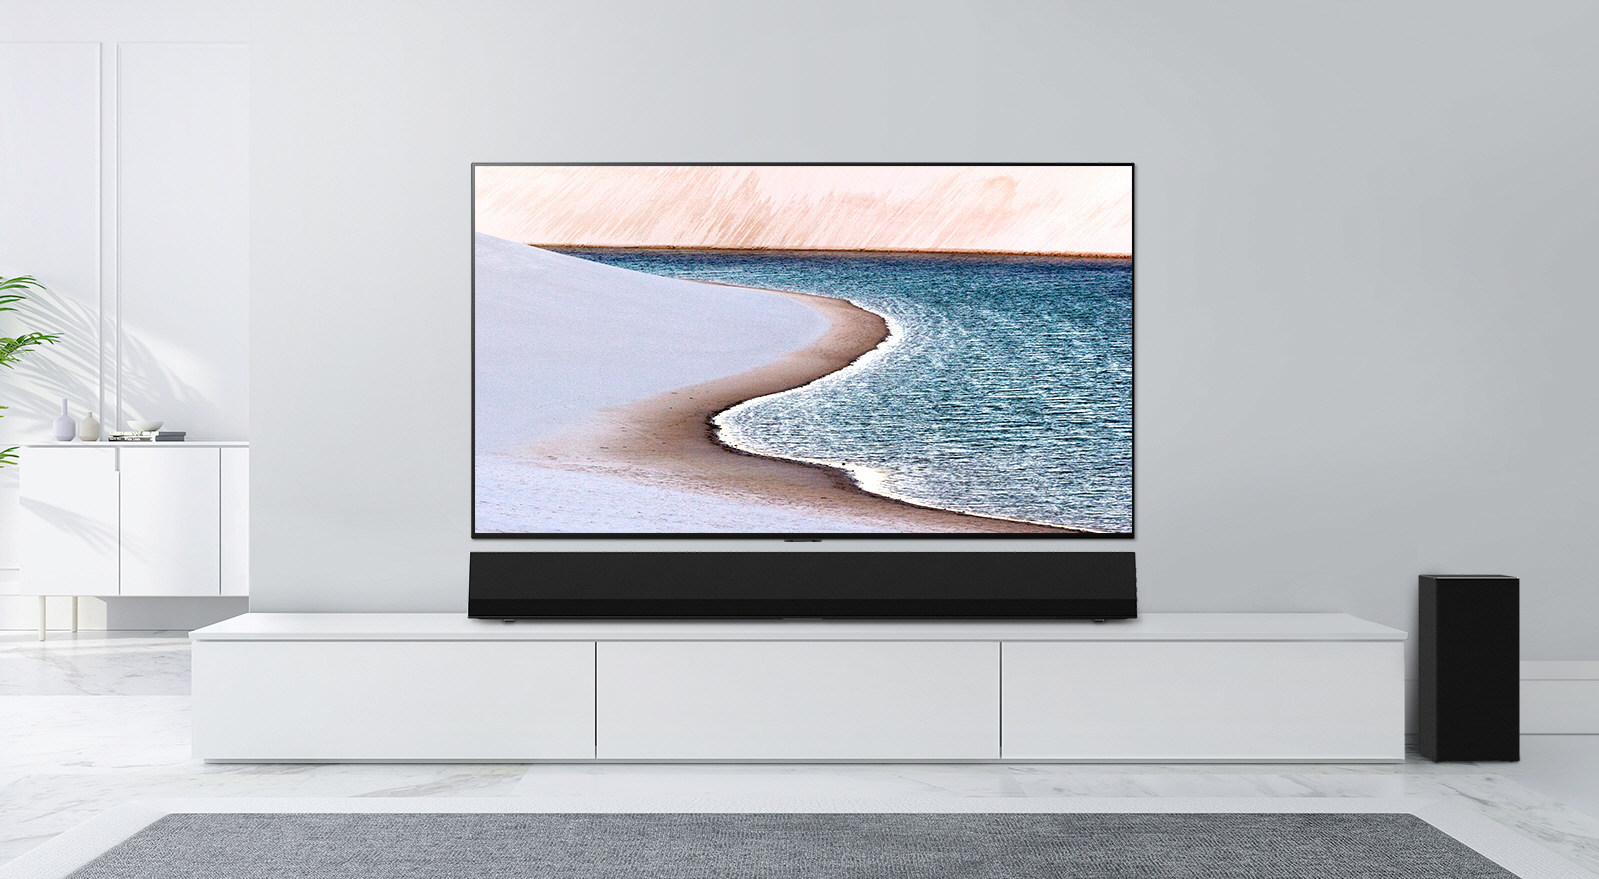 LG’s New Sound Bar Delivers Superior Sound, Pairs Perfectly With GX Gallery OLED TVs